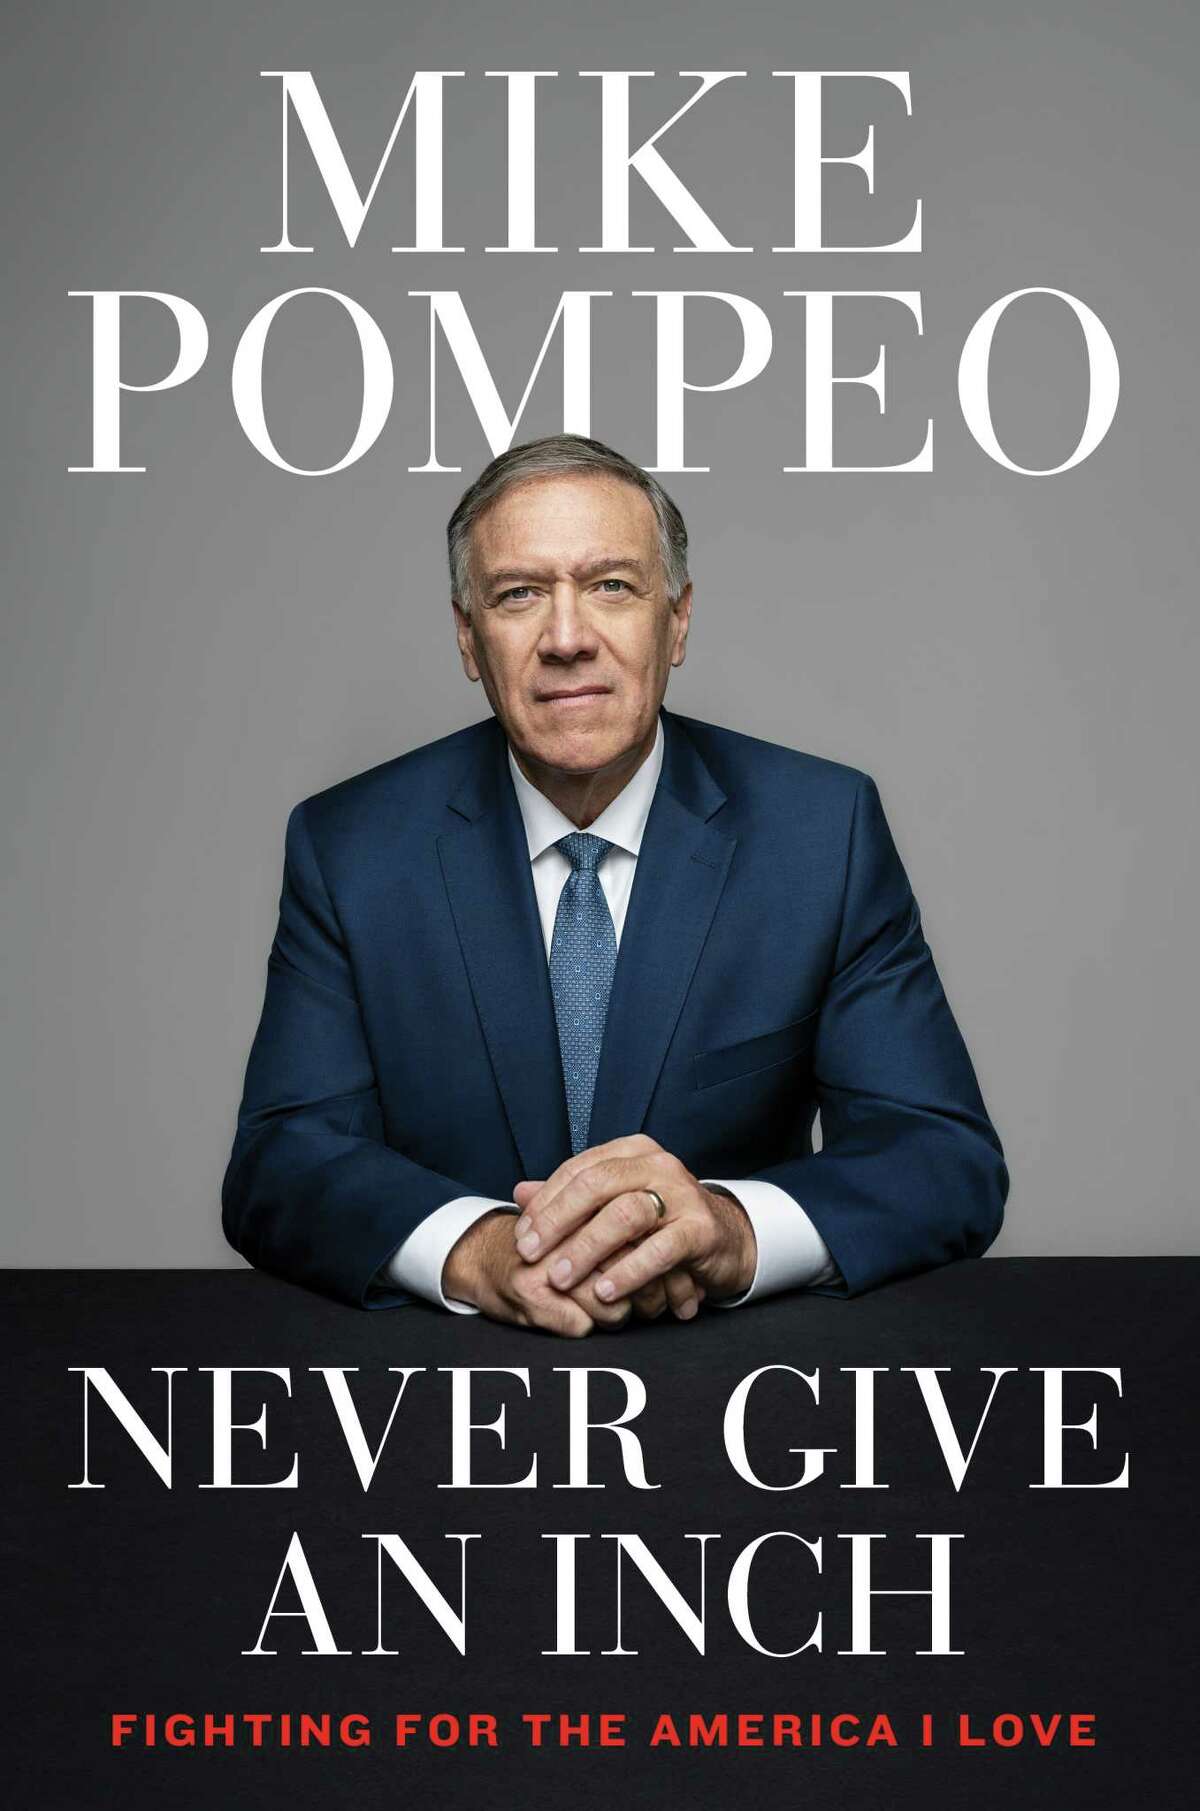 "Never Give an Inch" by Mike Pompeo